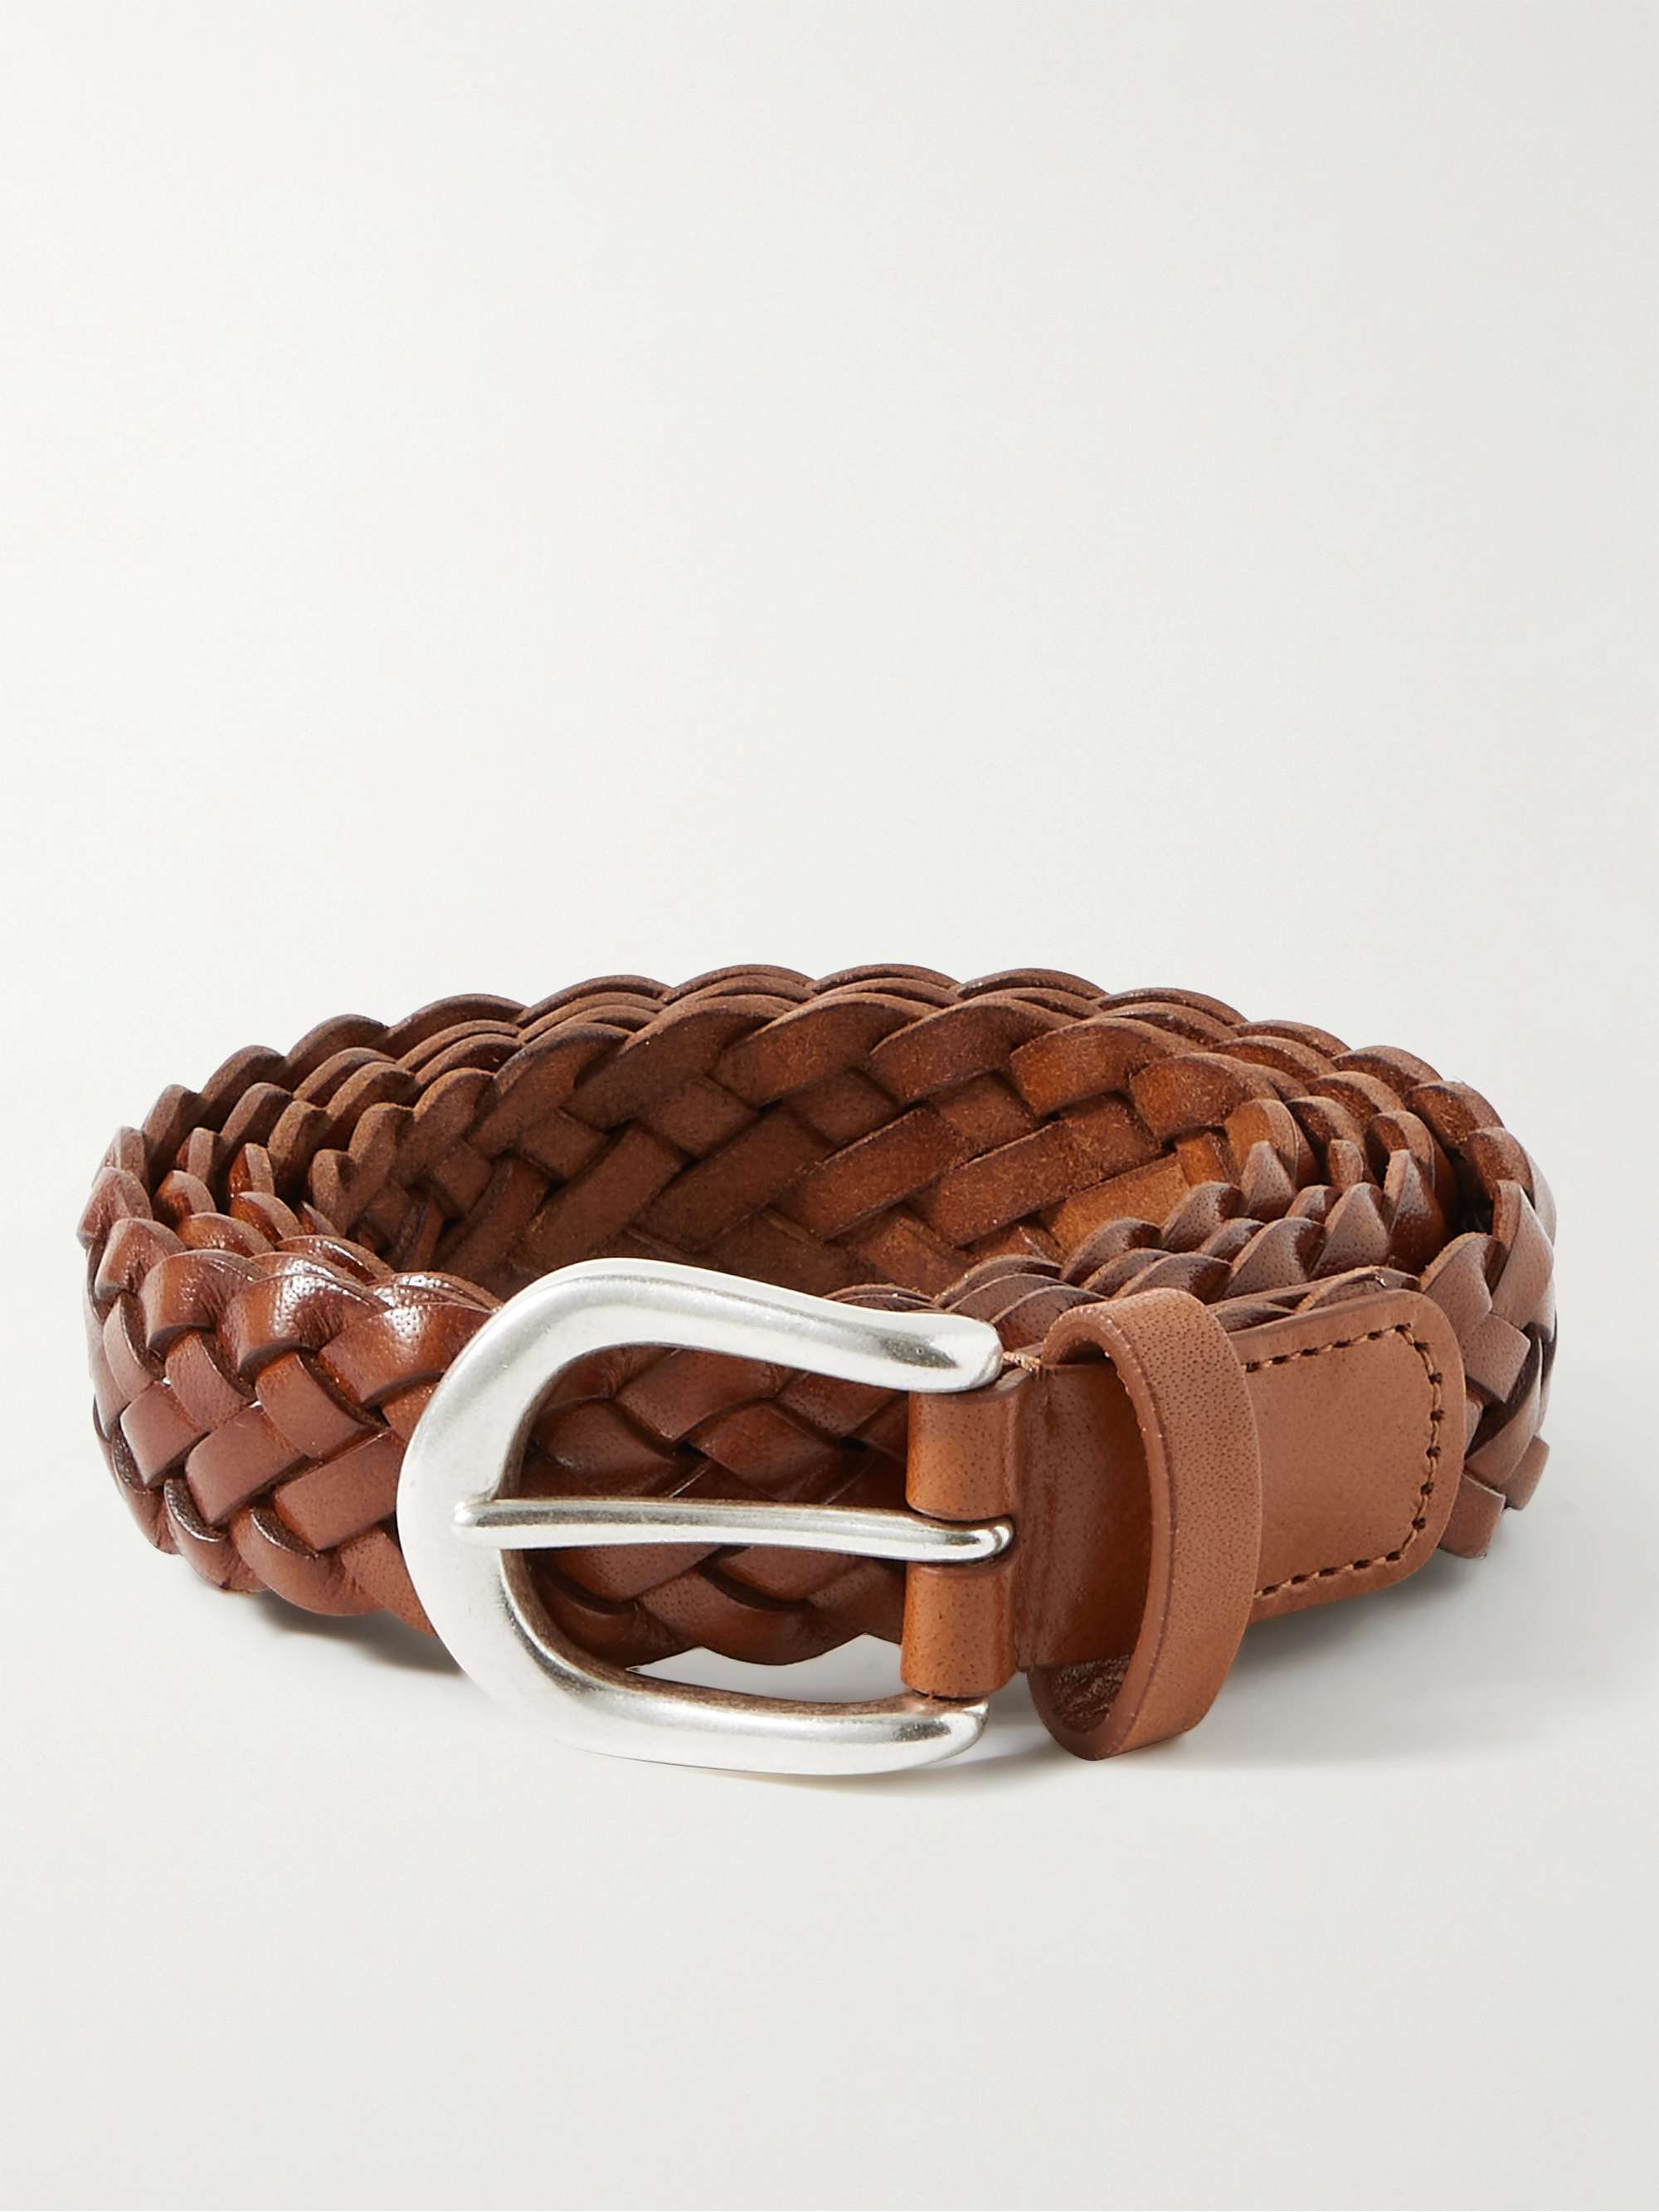 ANDERSON'S 2.5cm Woven Leather Belt